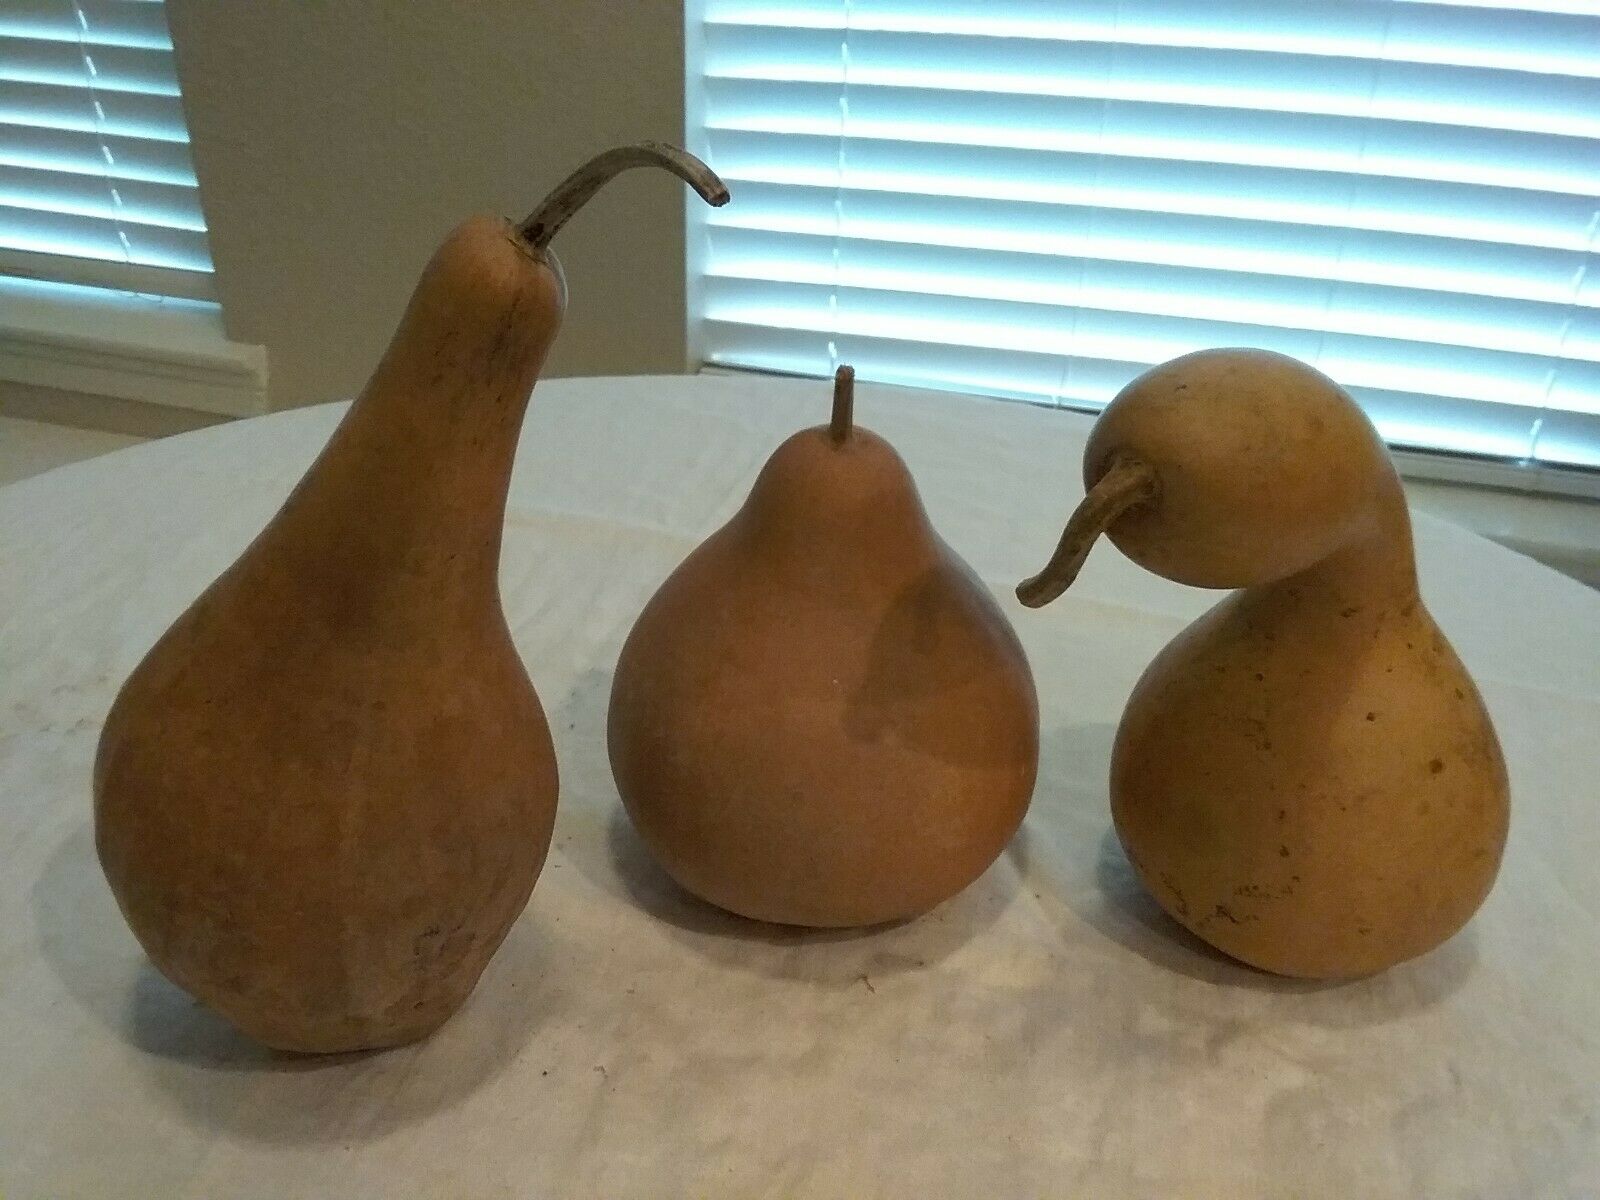 3 Nice Gourds Ready For Crafts